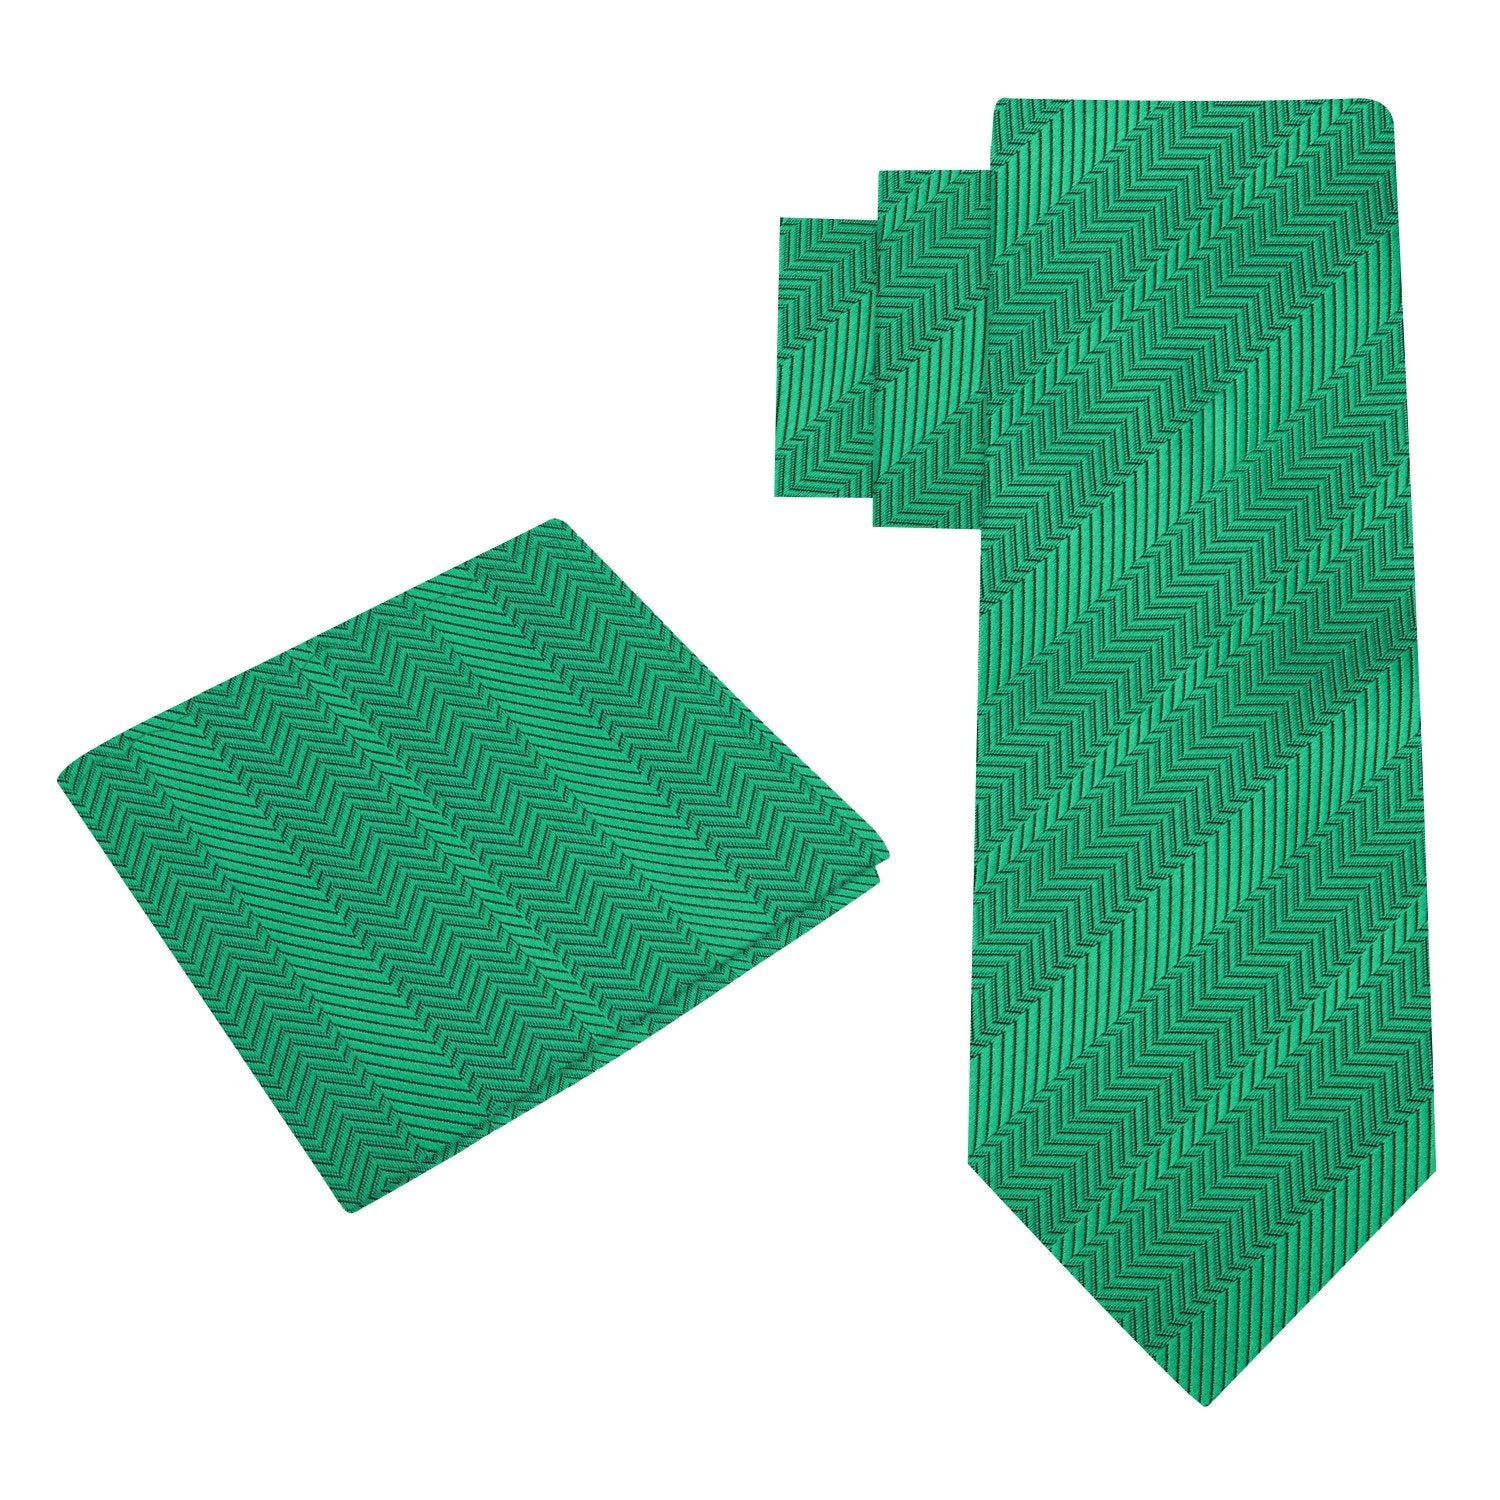 Alt View: Shamrock Green Tie and Pocket Square